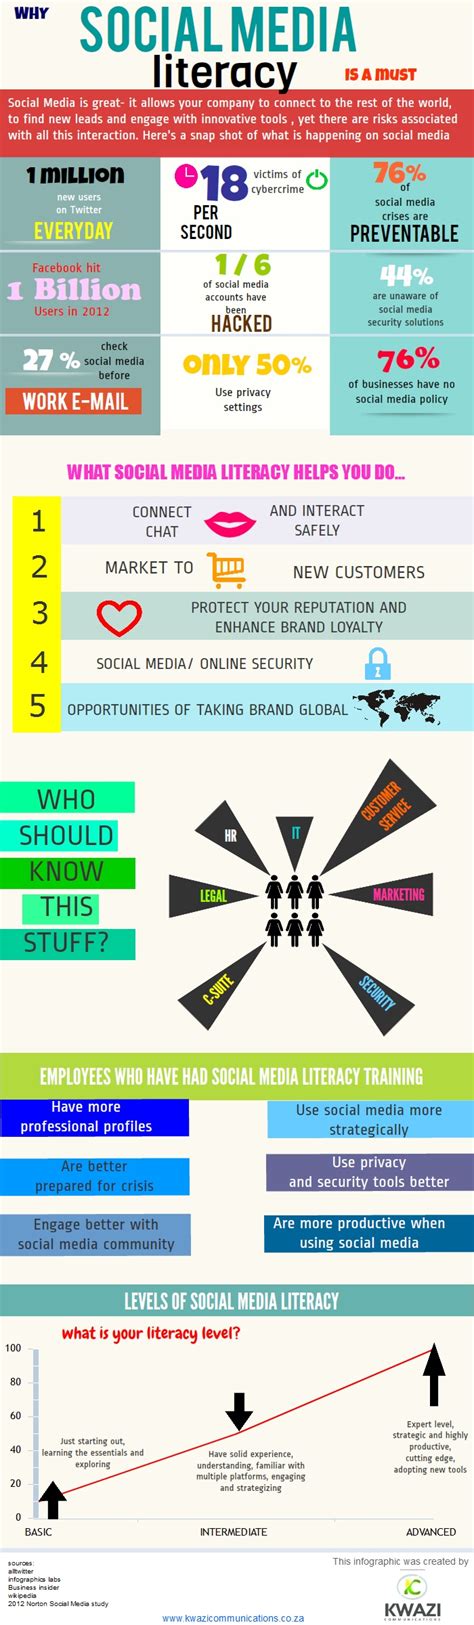 Infographic On Why Social Media Literacy Is Important In The Business